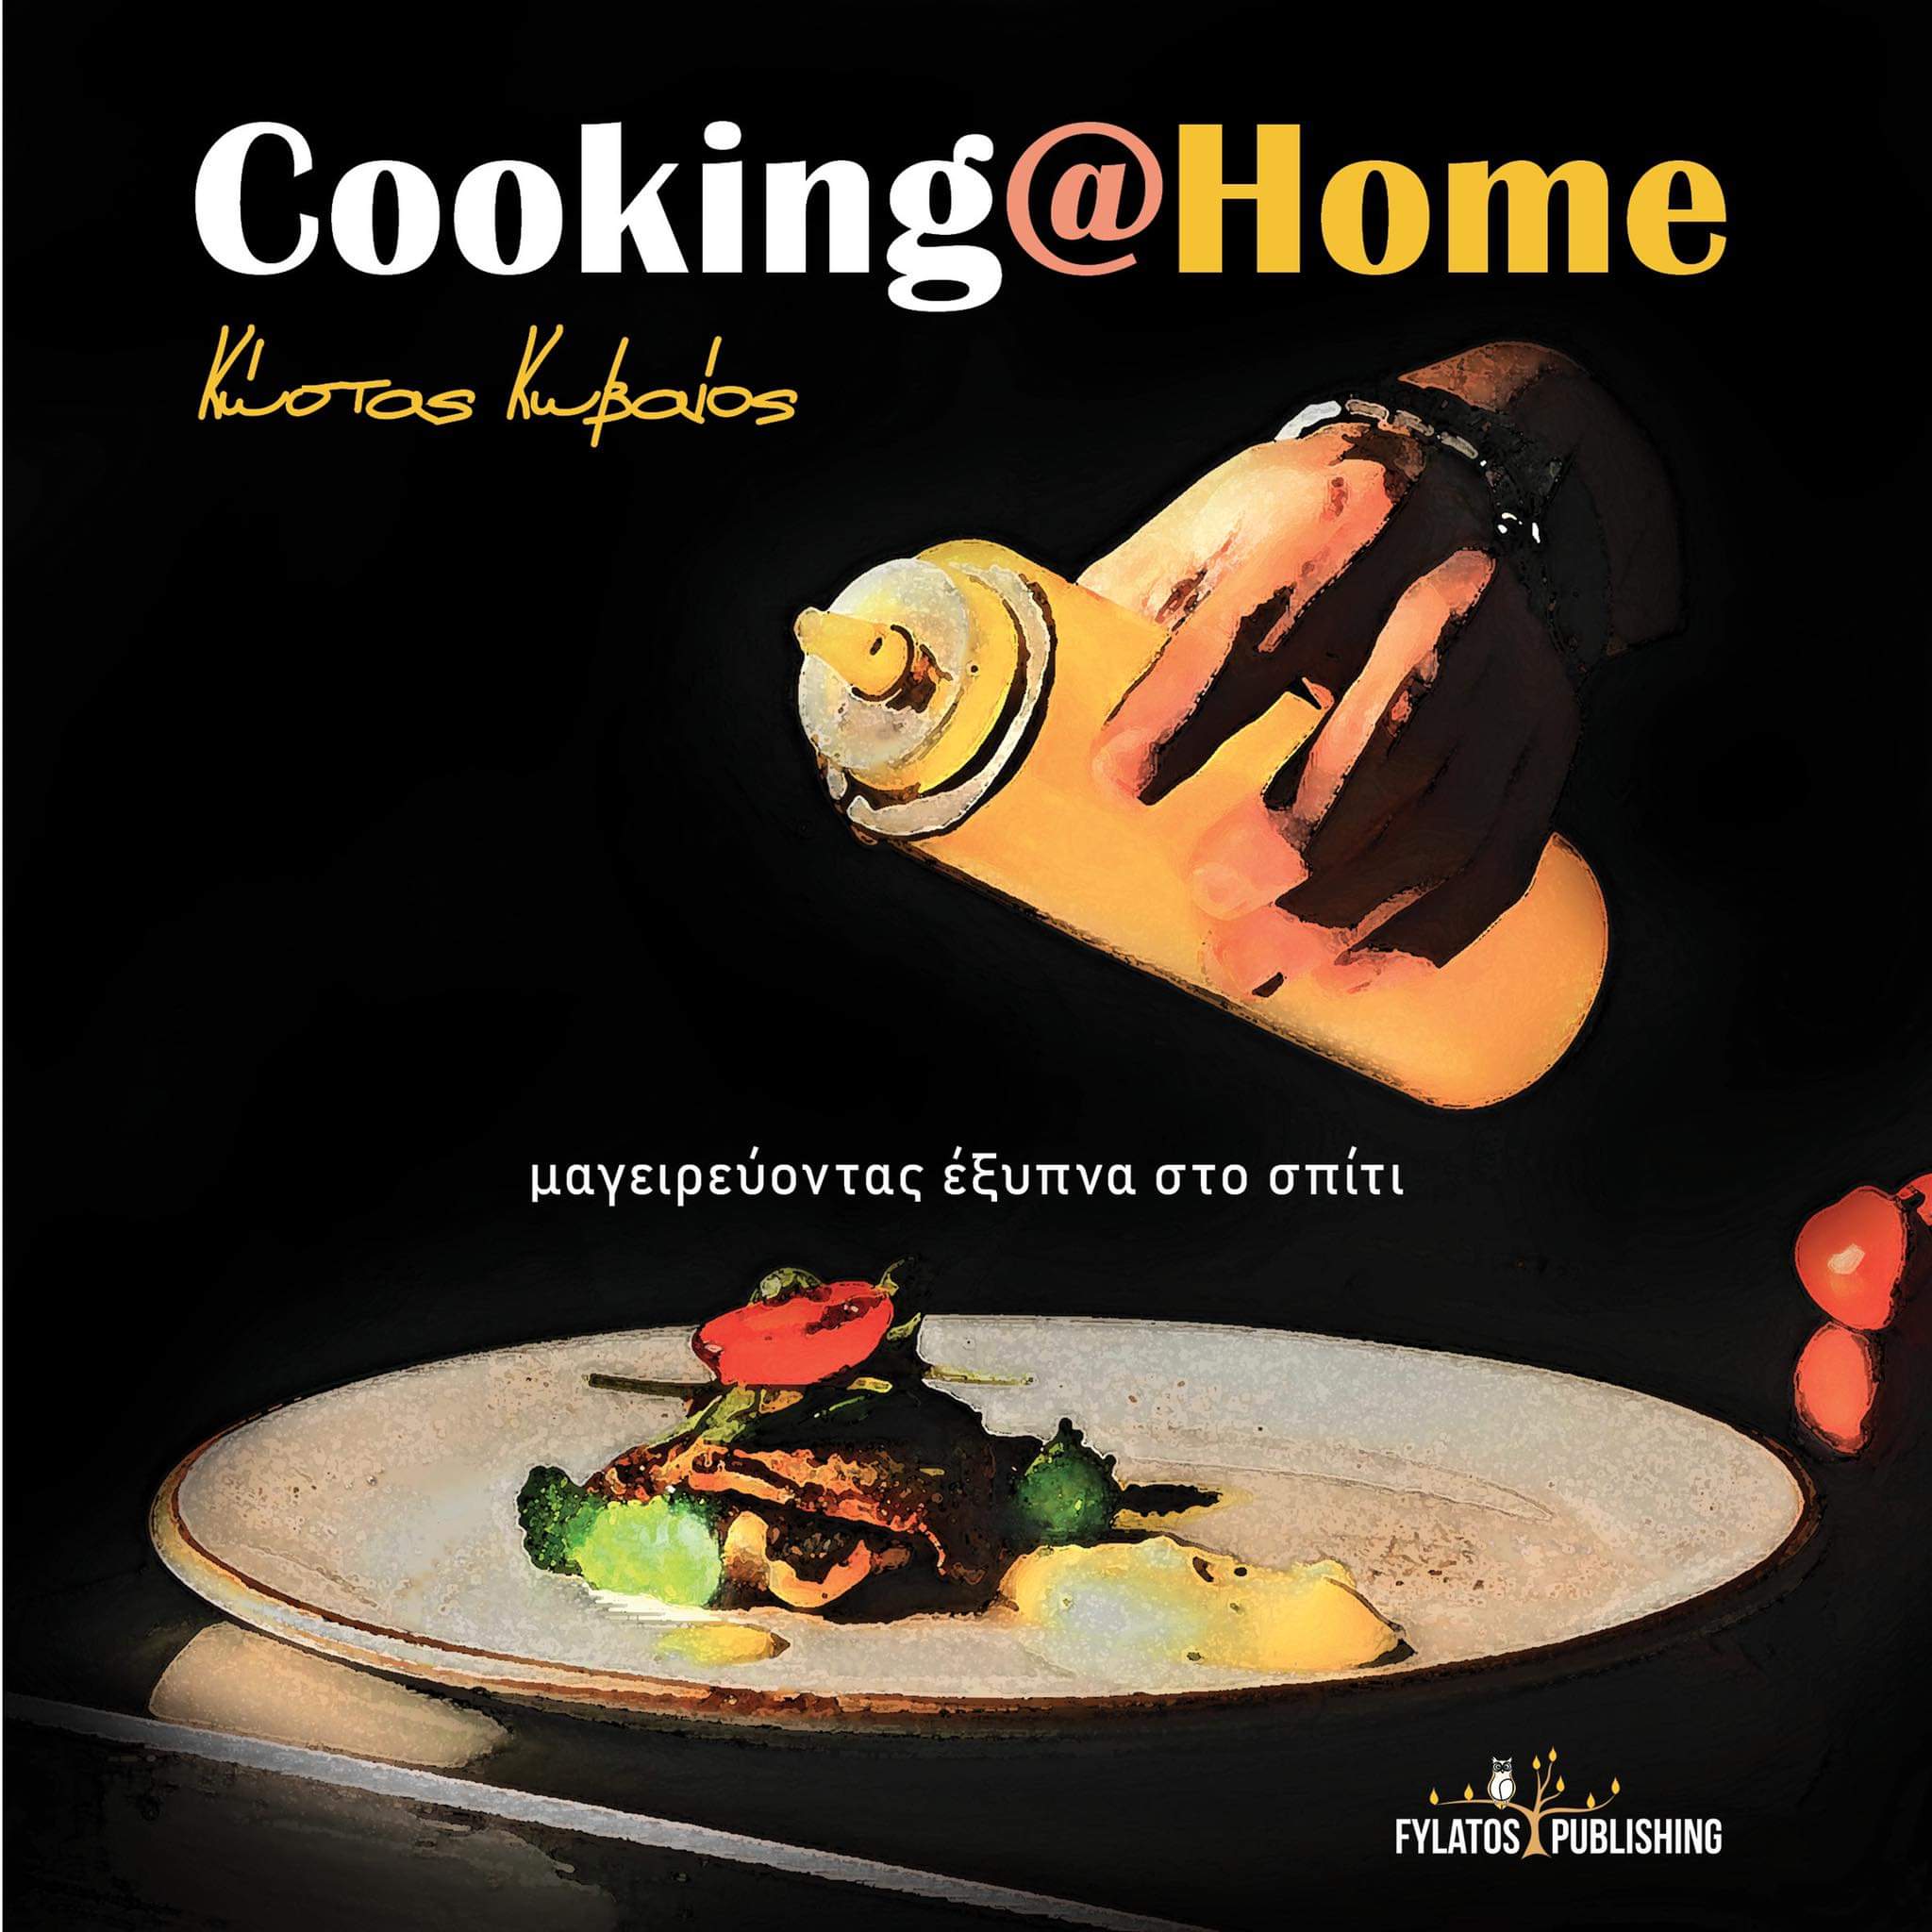 Cooking at Home is a cookbook by Executive Chef Kostas Koveos for everyone, who wishes to cook healthy, easy and smart recipes at home.